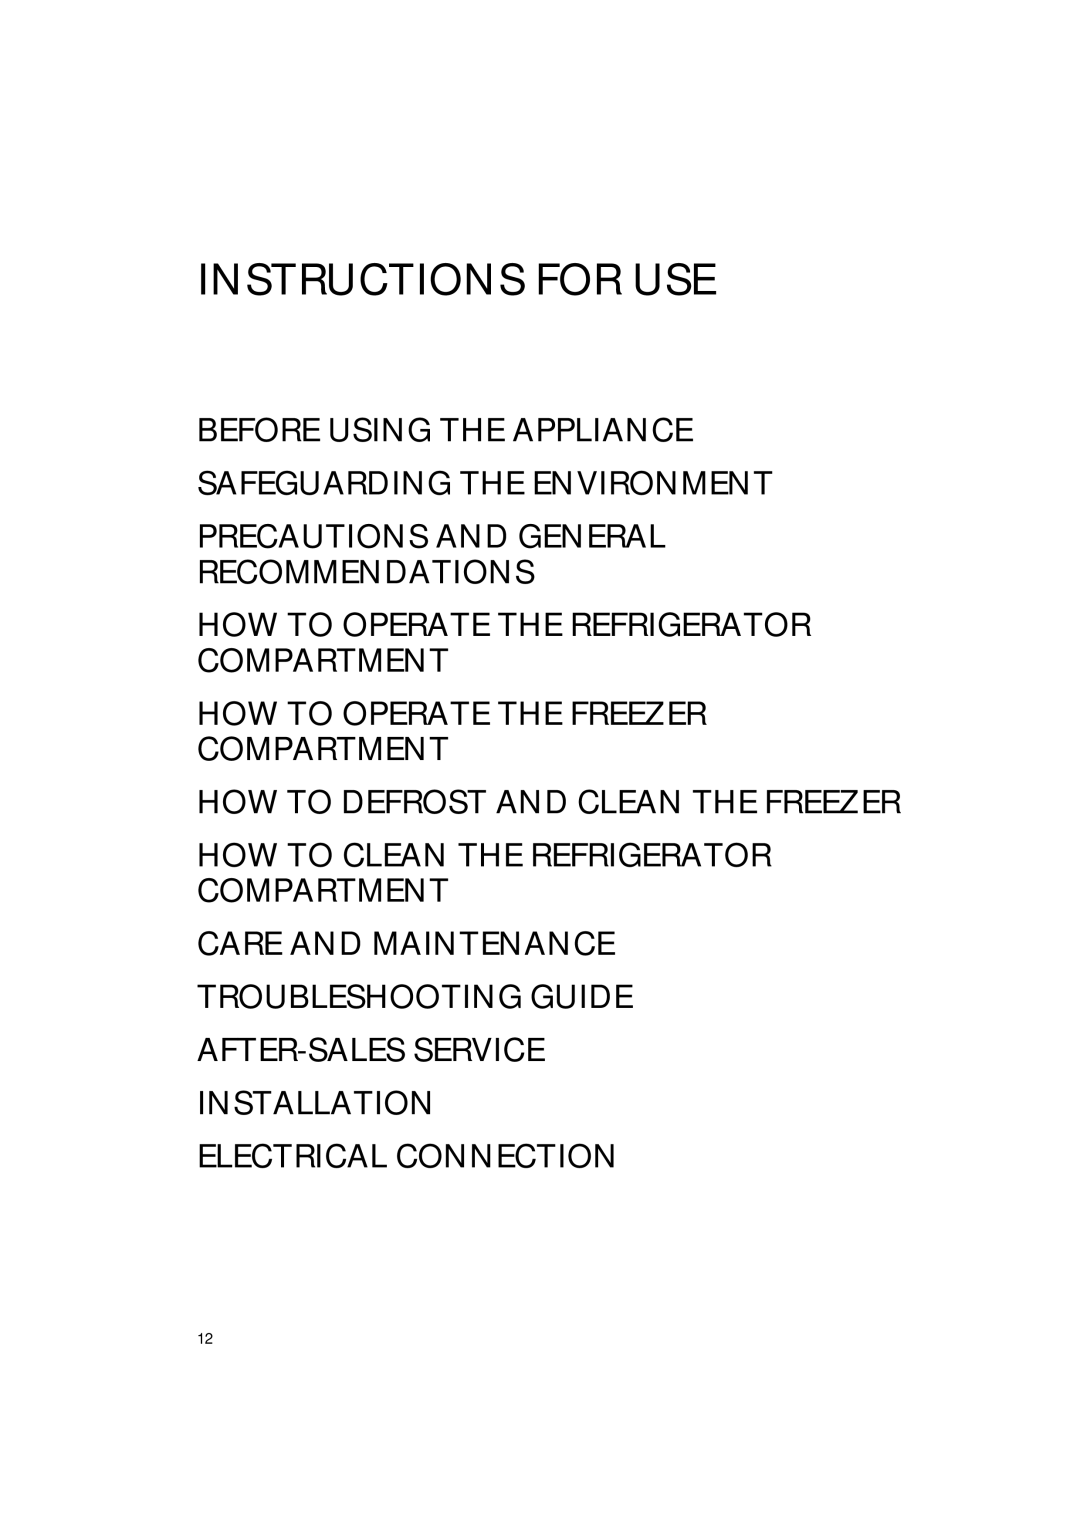 Smeg FR238APL manual Precautions And General Recommendations, How To Operate The Refrigerator Compartment 